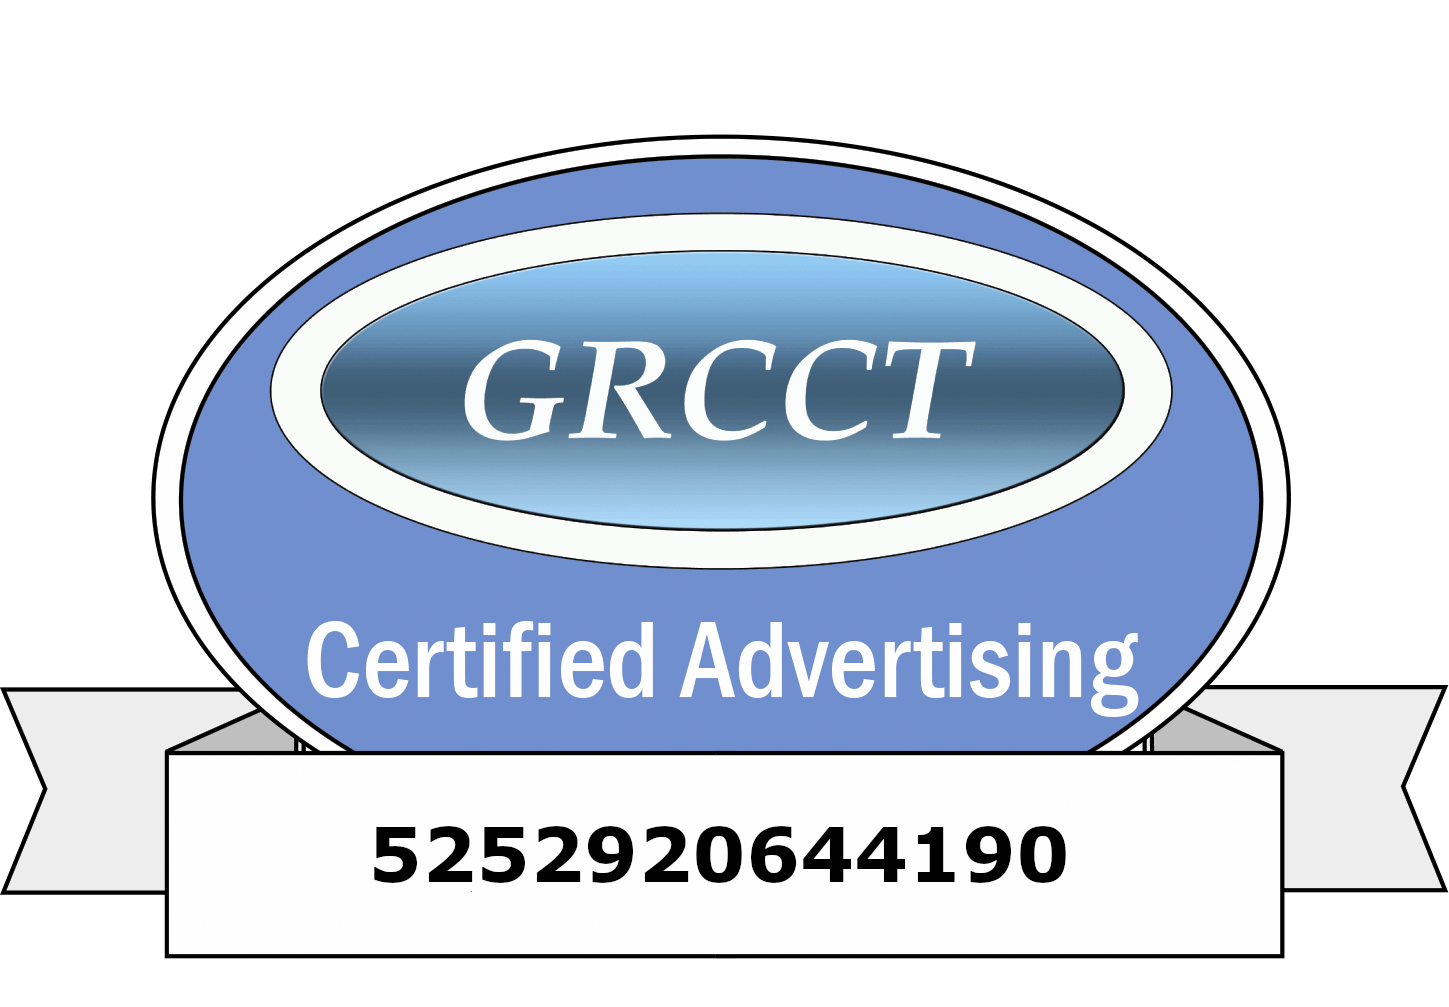 Certification logo with long number